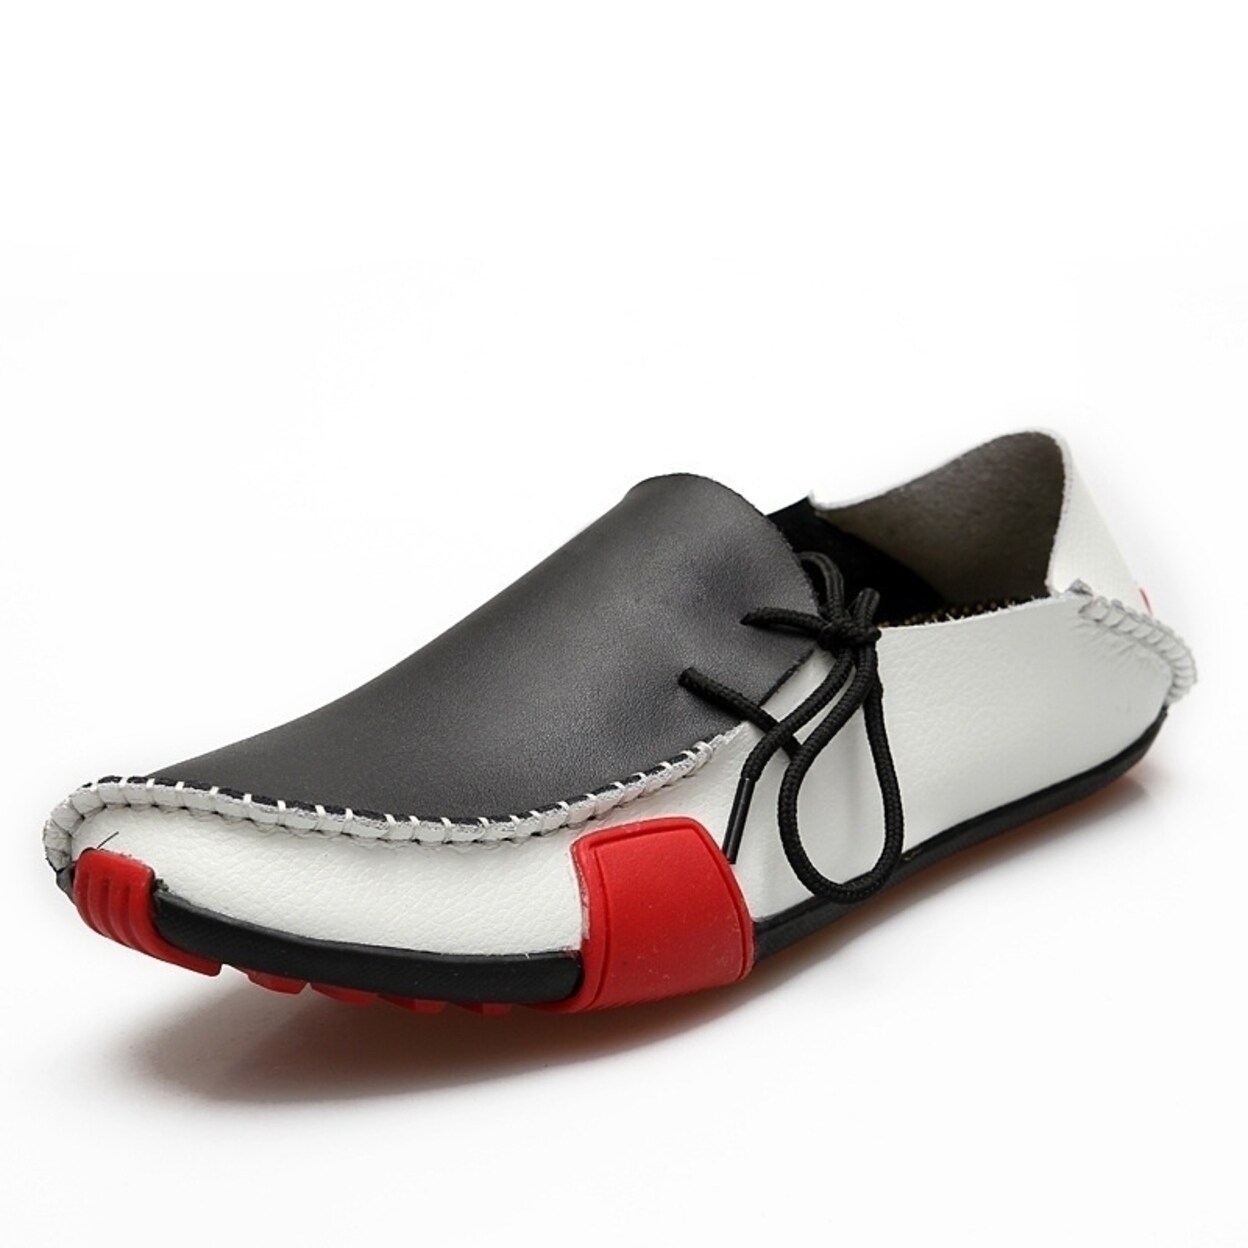 mens casual moccasins